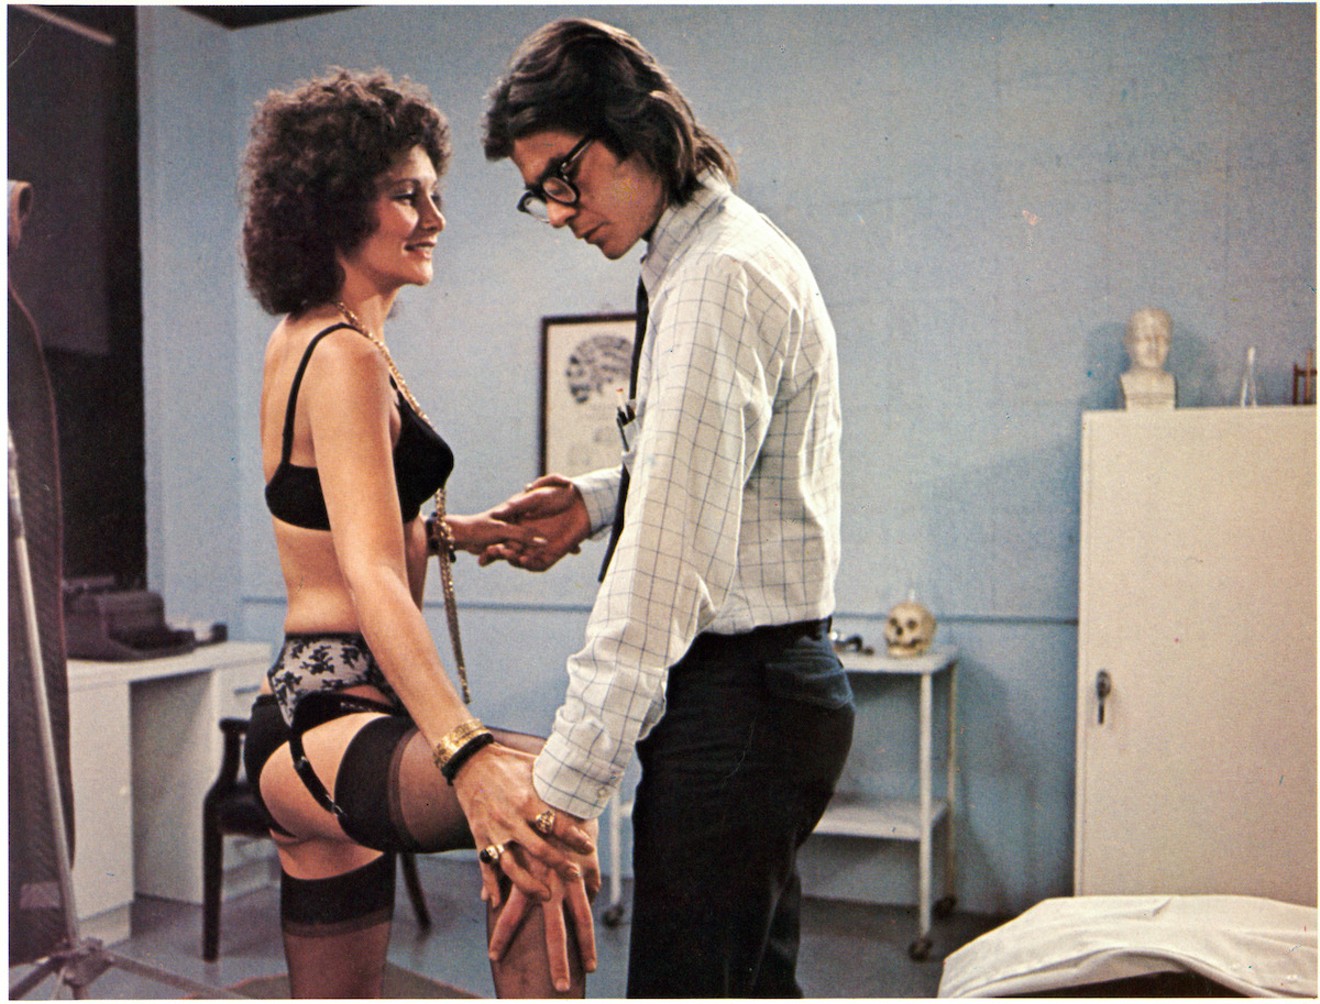 The legendary 1972 porn feature film Deep Throat was shot at various South Florida locales.